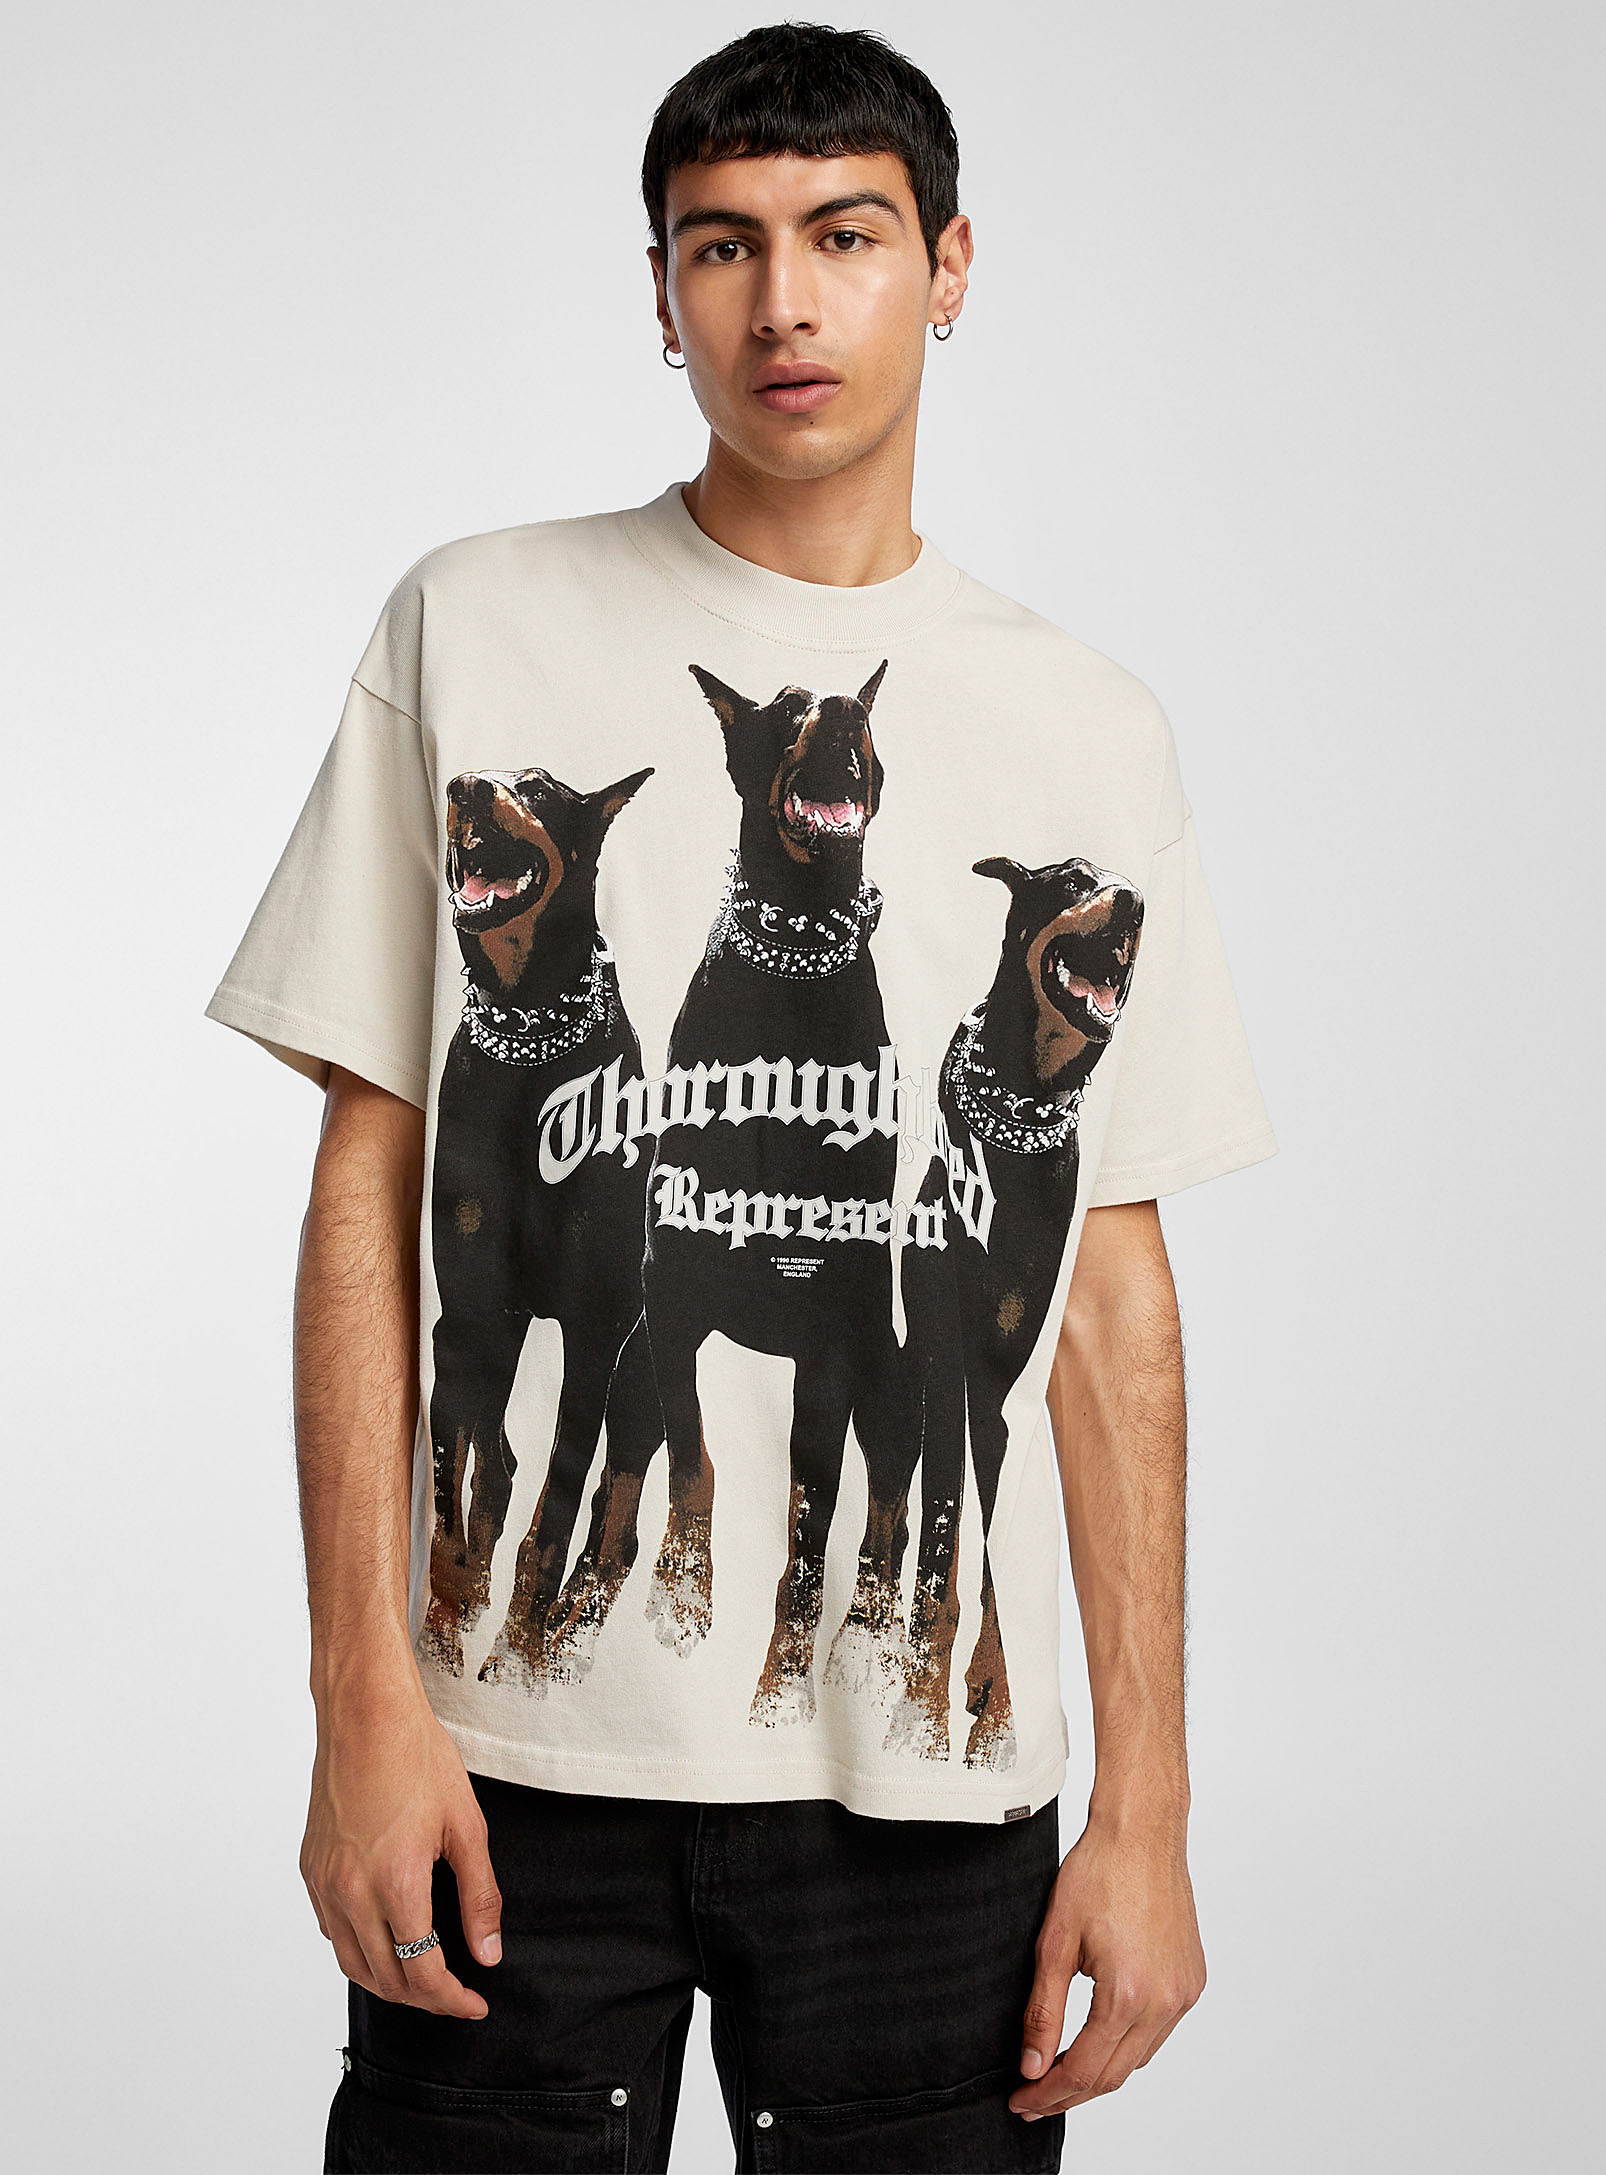 Represent - Le t-shirt Thoroughbred